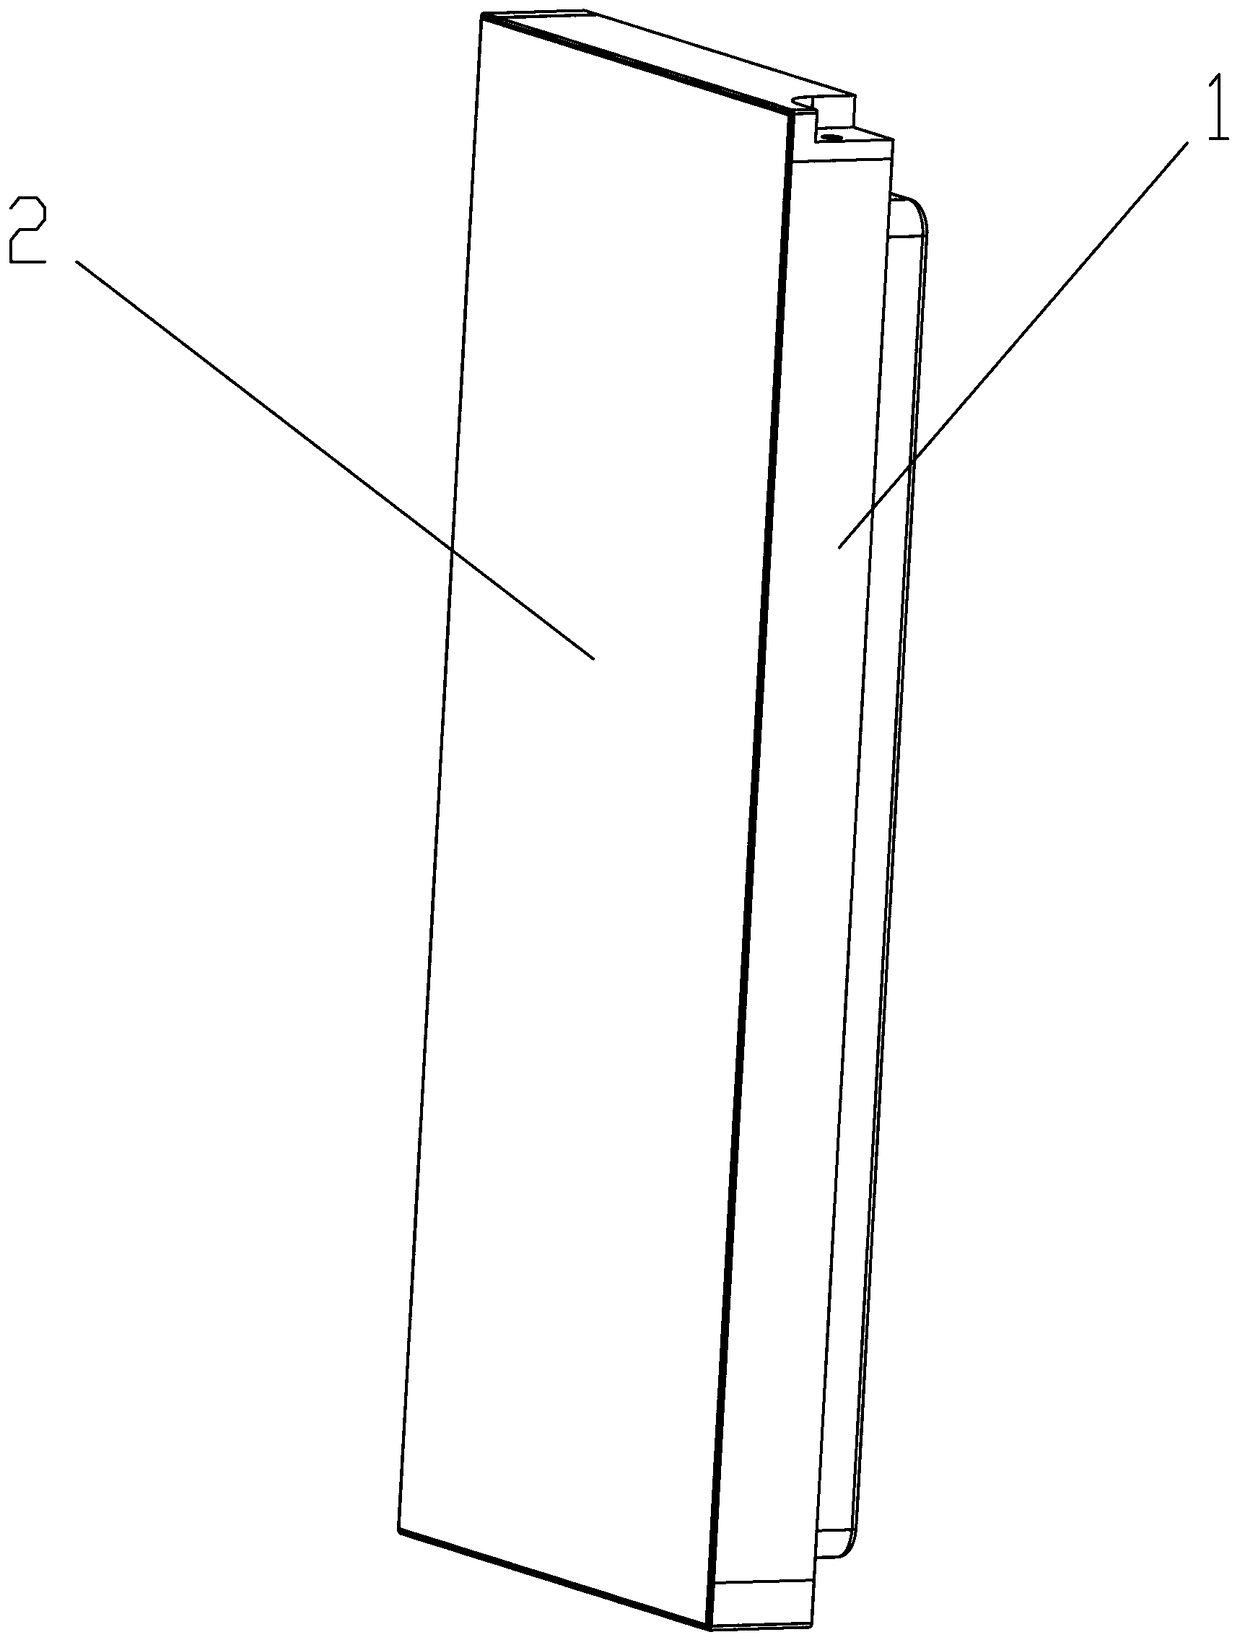 Display screen assembly connecting structure for household electrical appliance products